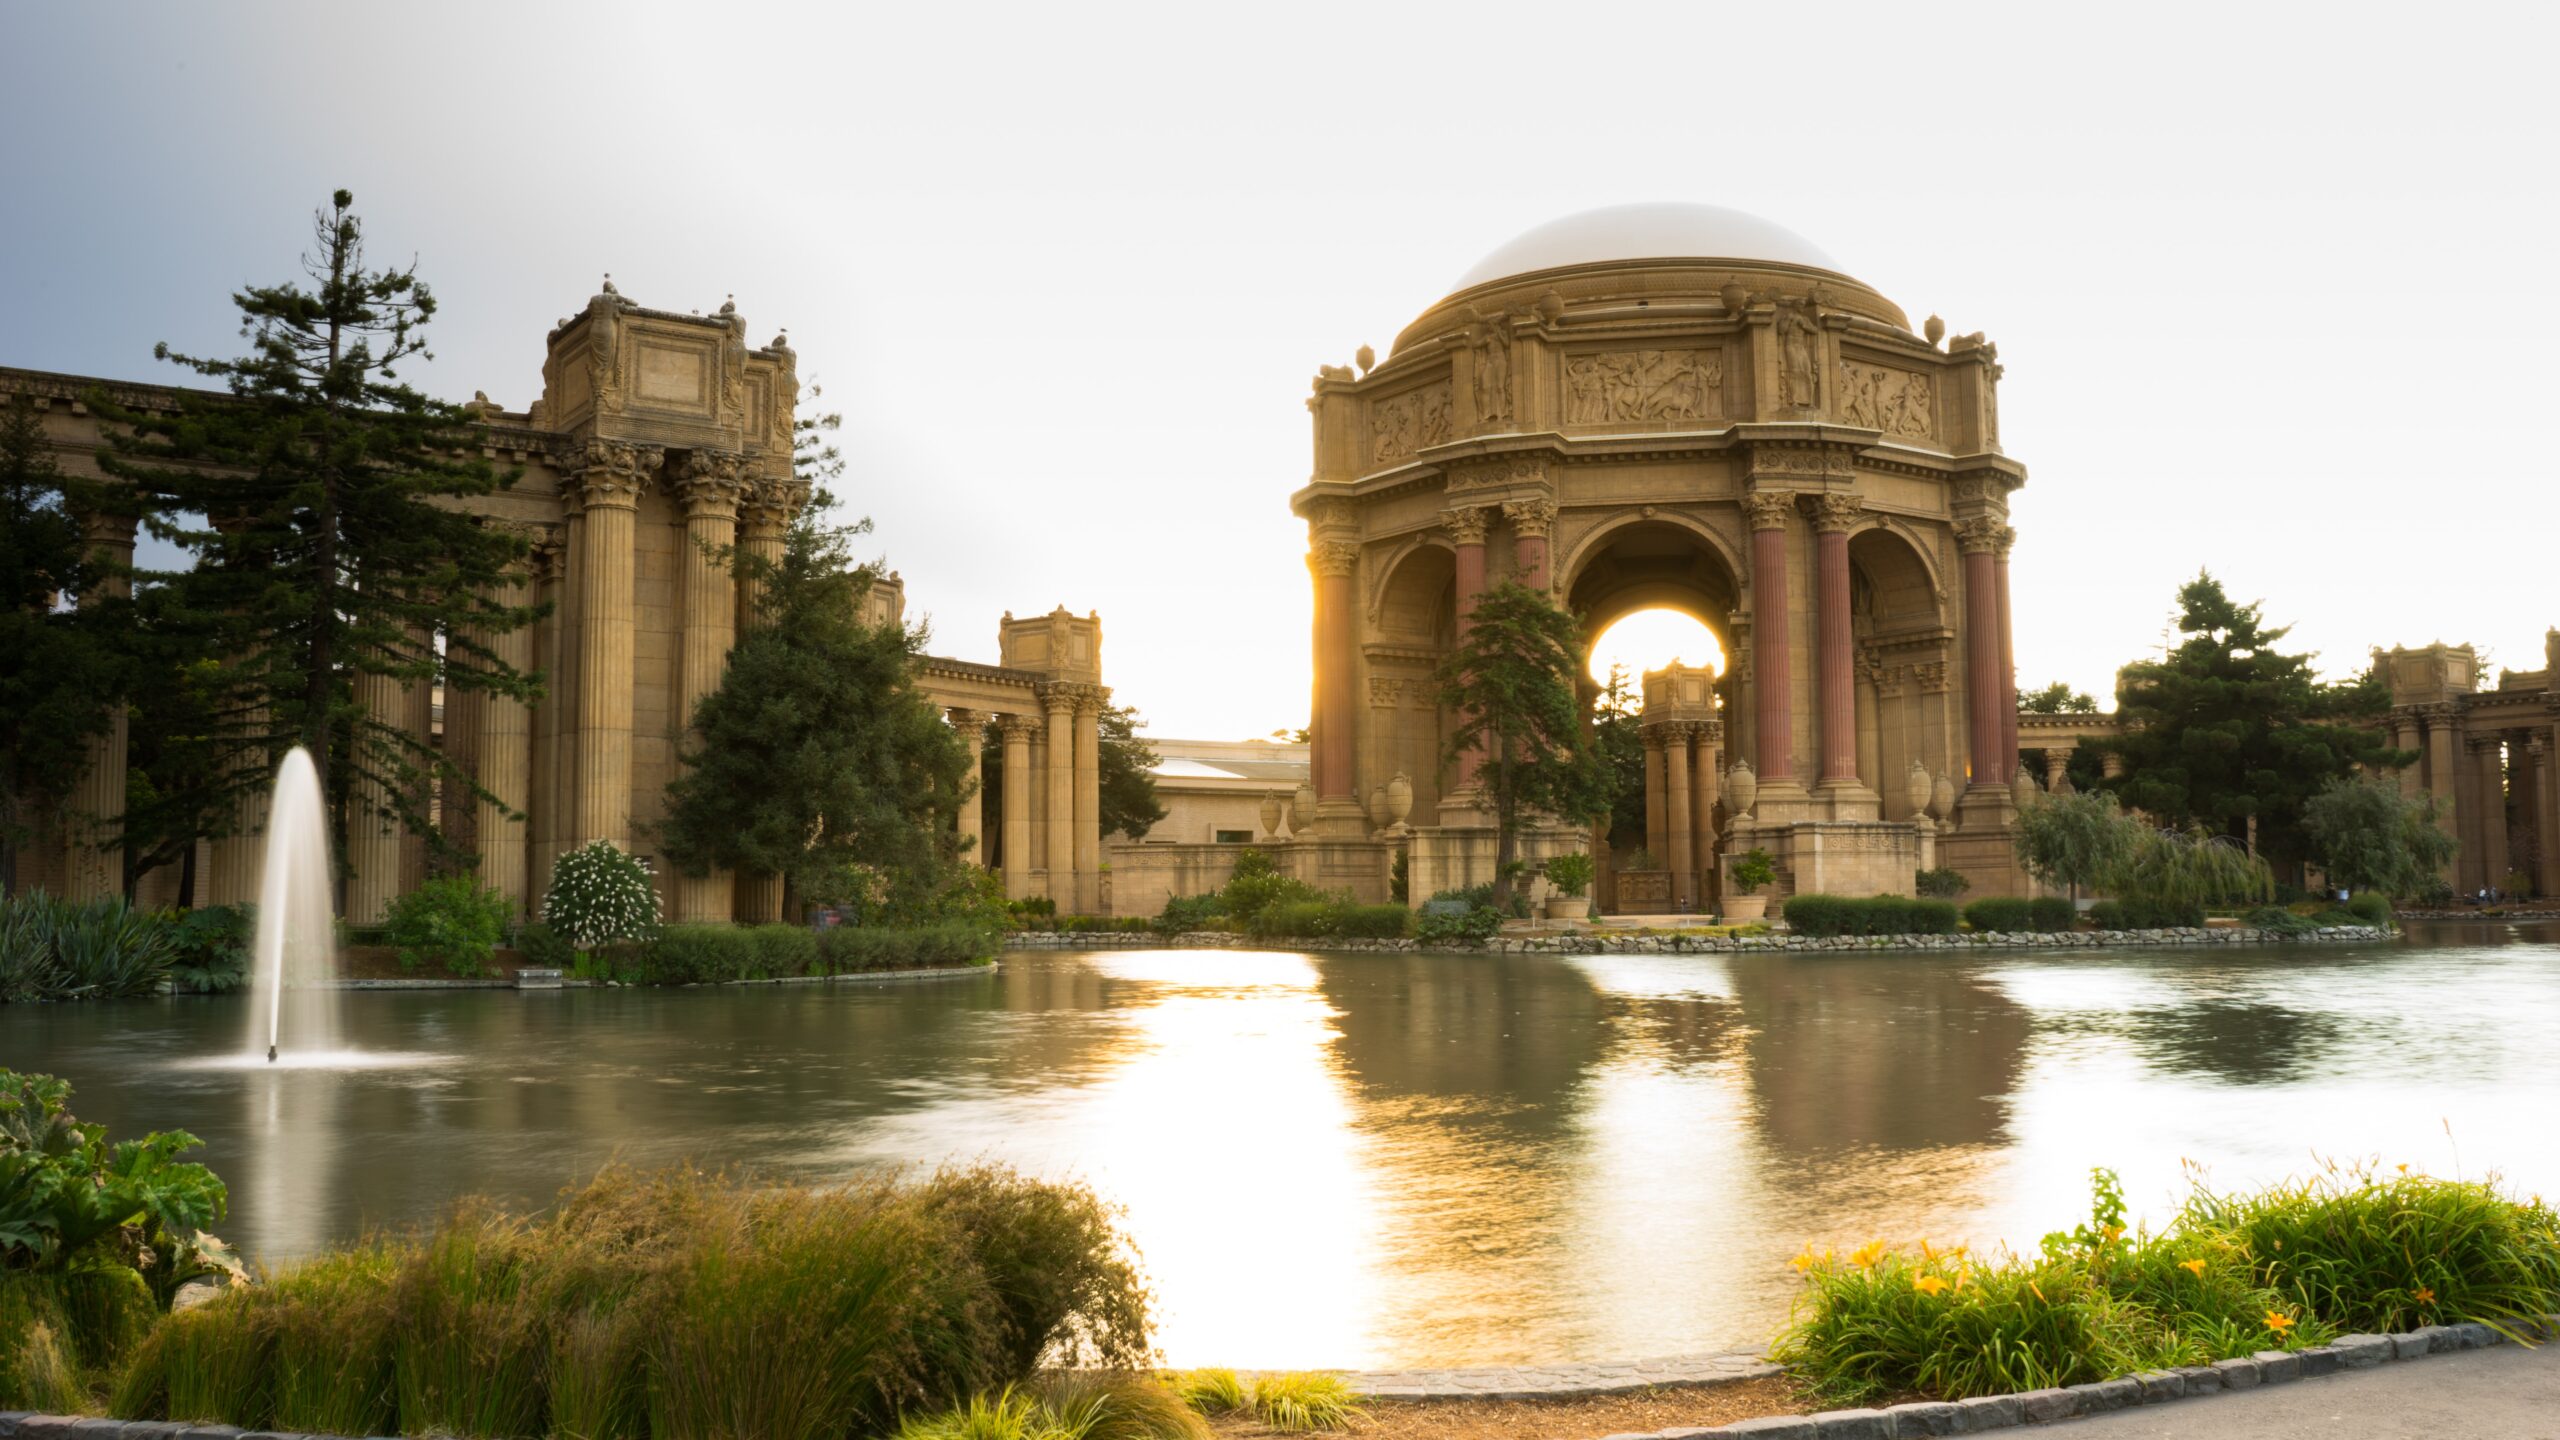 Sunset view of the Palace of Fine Arts